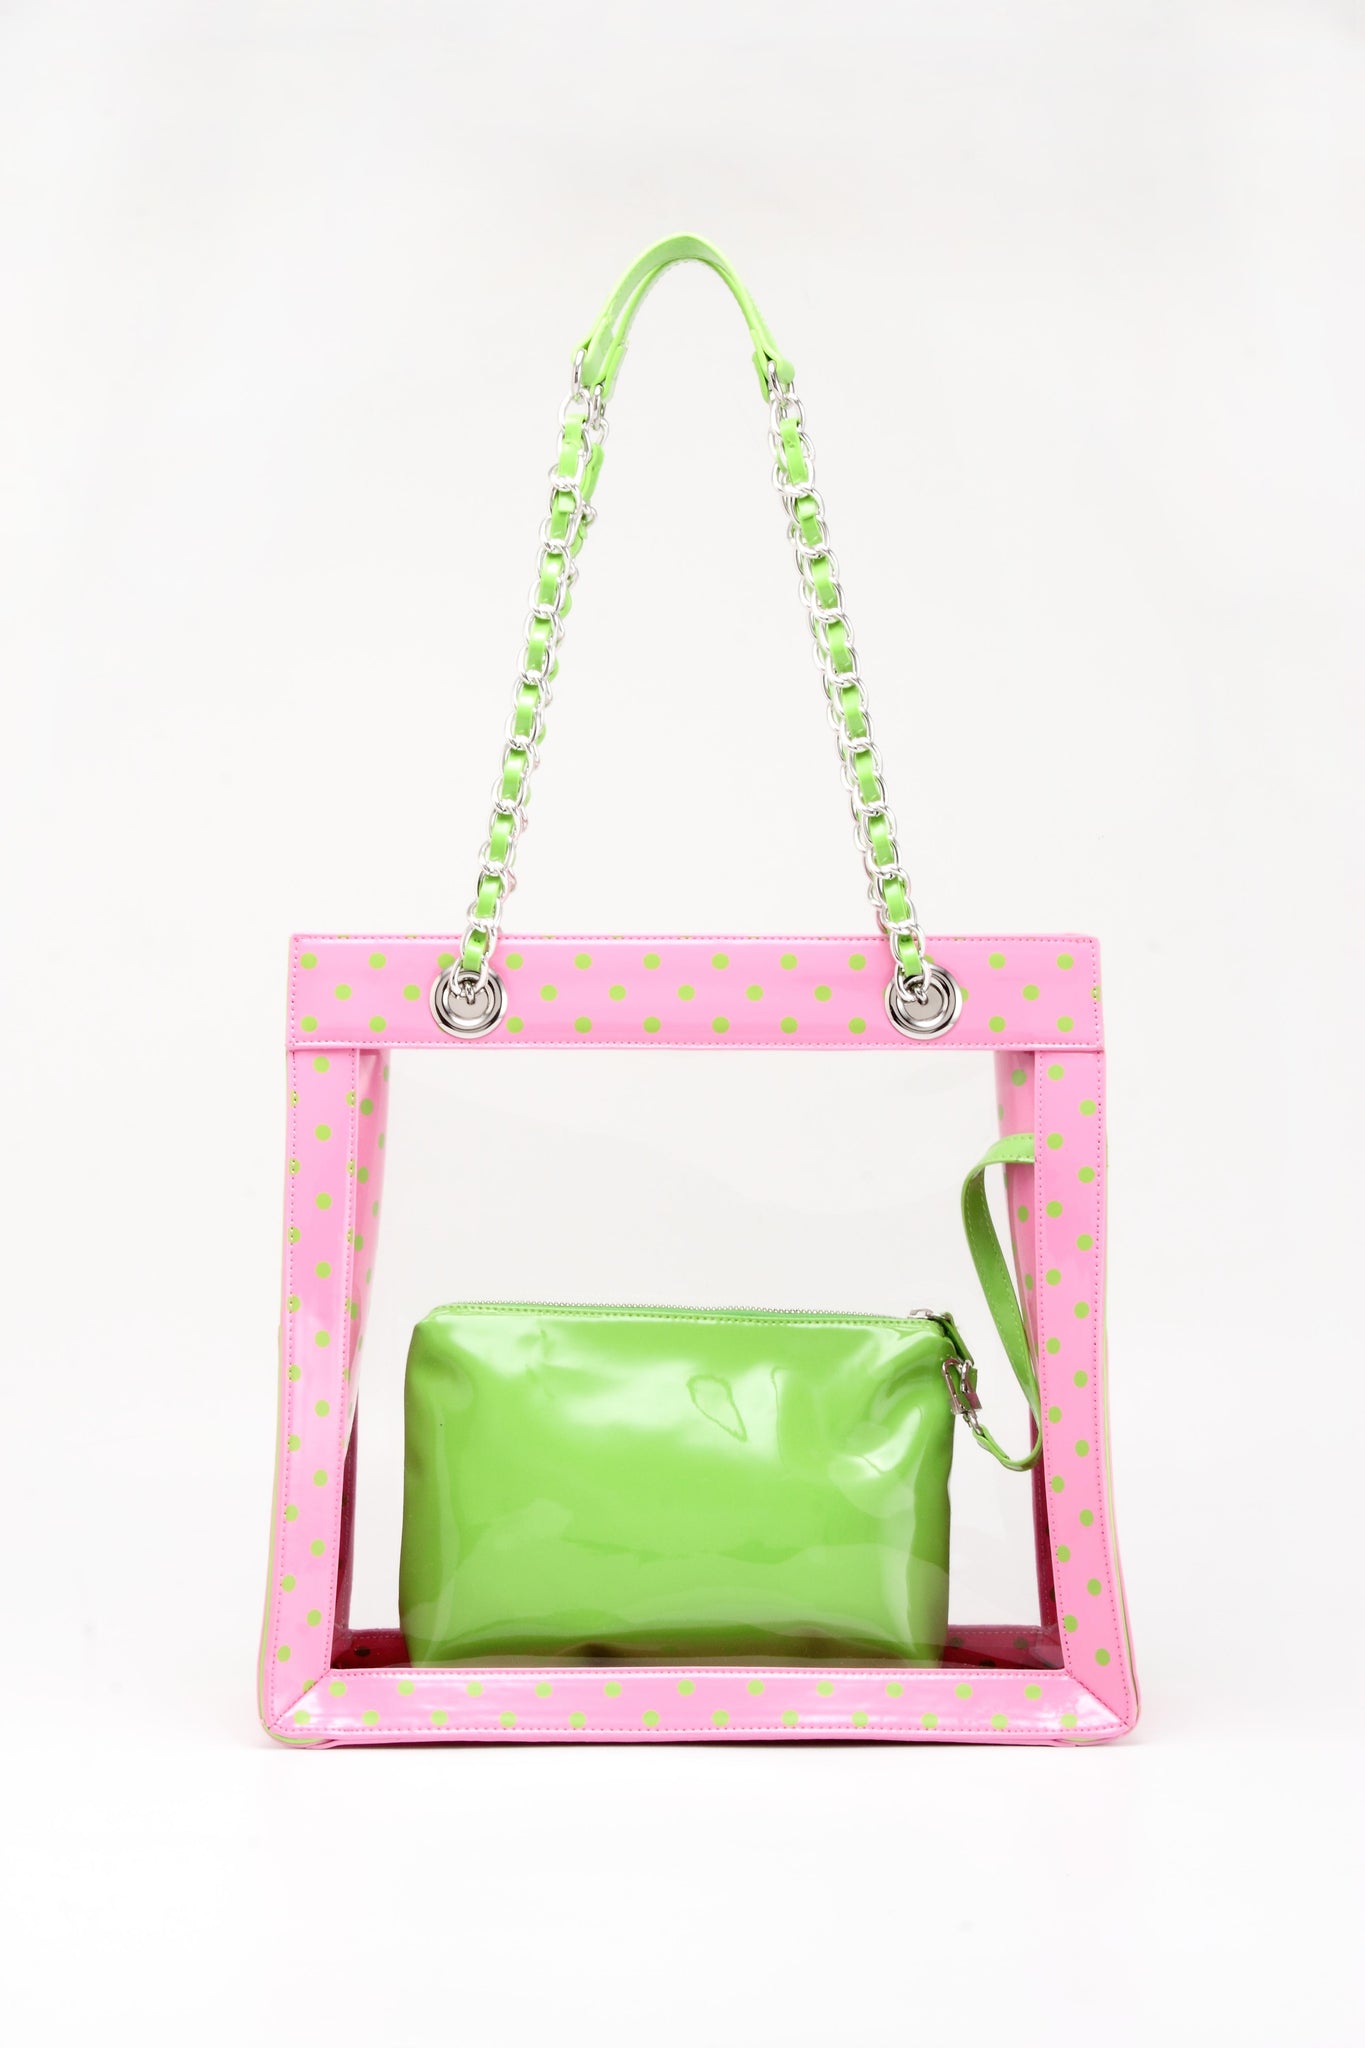 Green Neon Bag Clear Jelly Tote Bag Clear Messenger Bag Satchel Clear Jelly  Bag Clear Handbag Minimalist Bag - Etsy